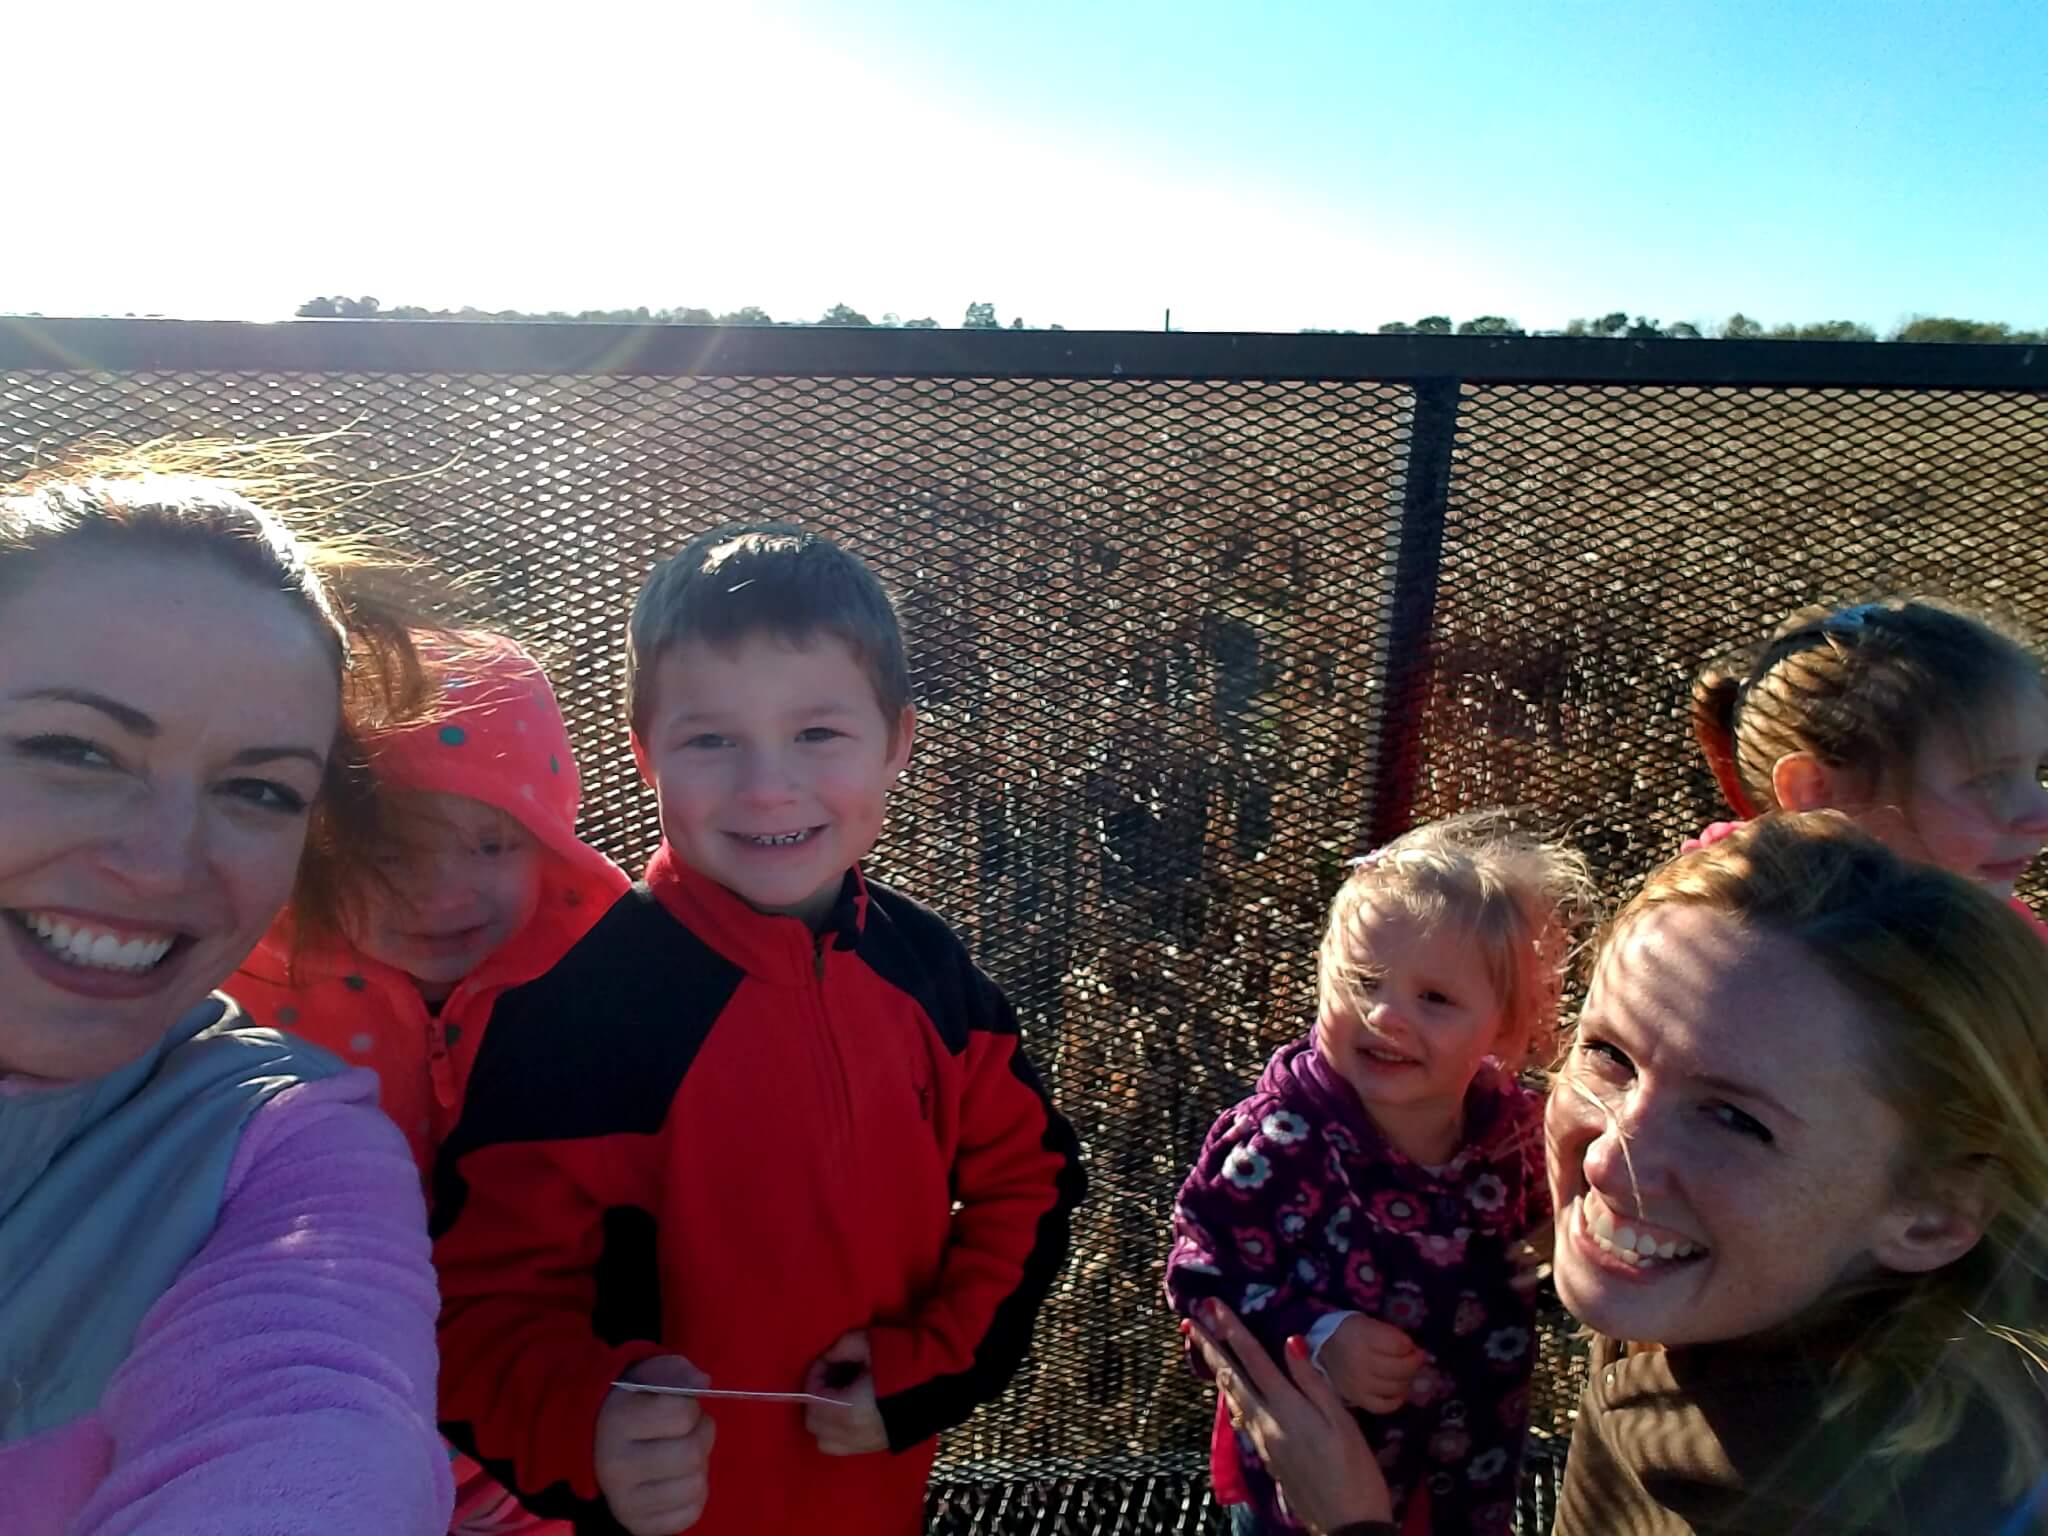 18. Conquering the corn maze tower (with little adventurers)